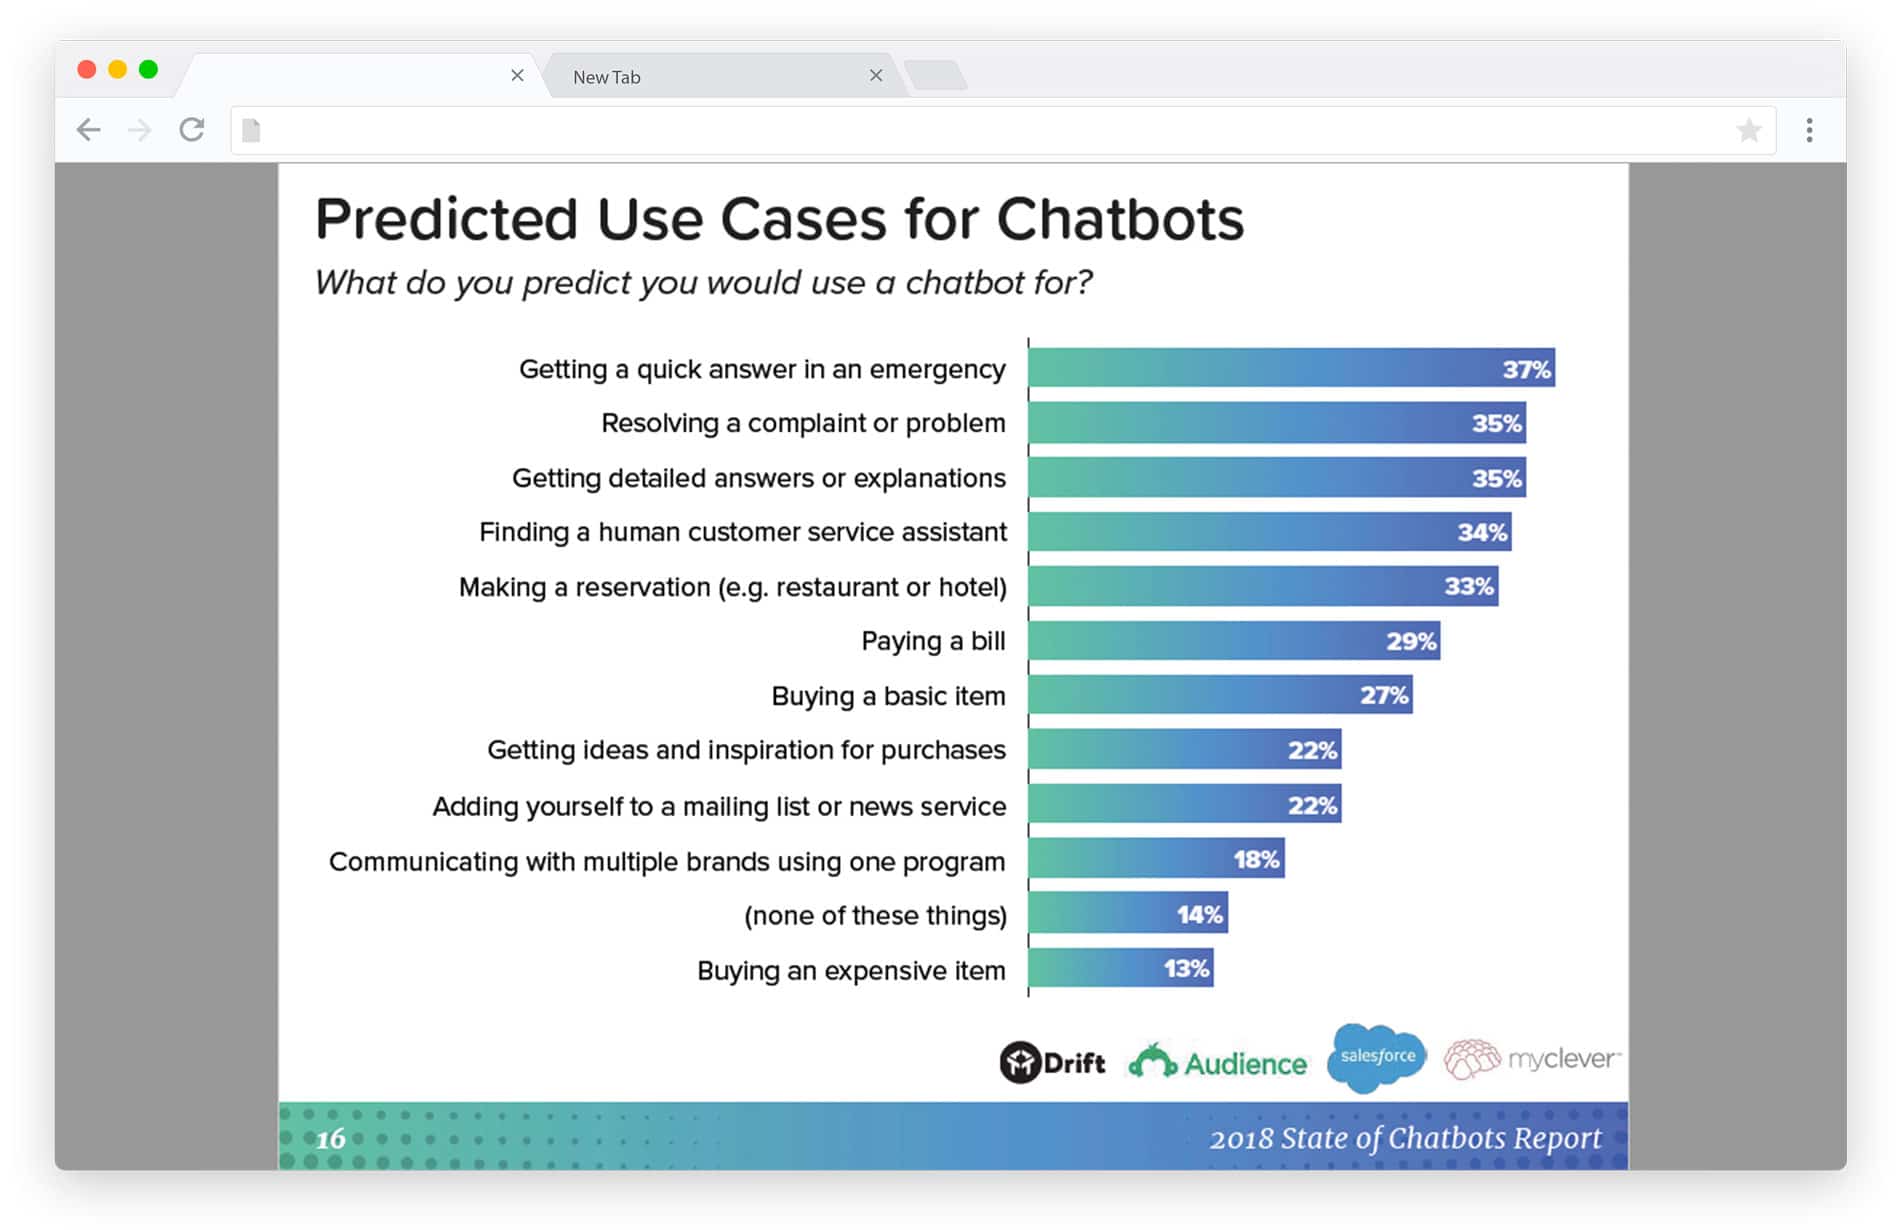 predicted use cases for chatbots